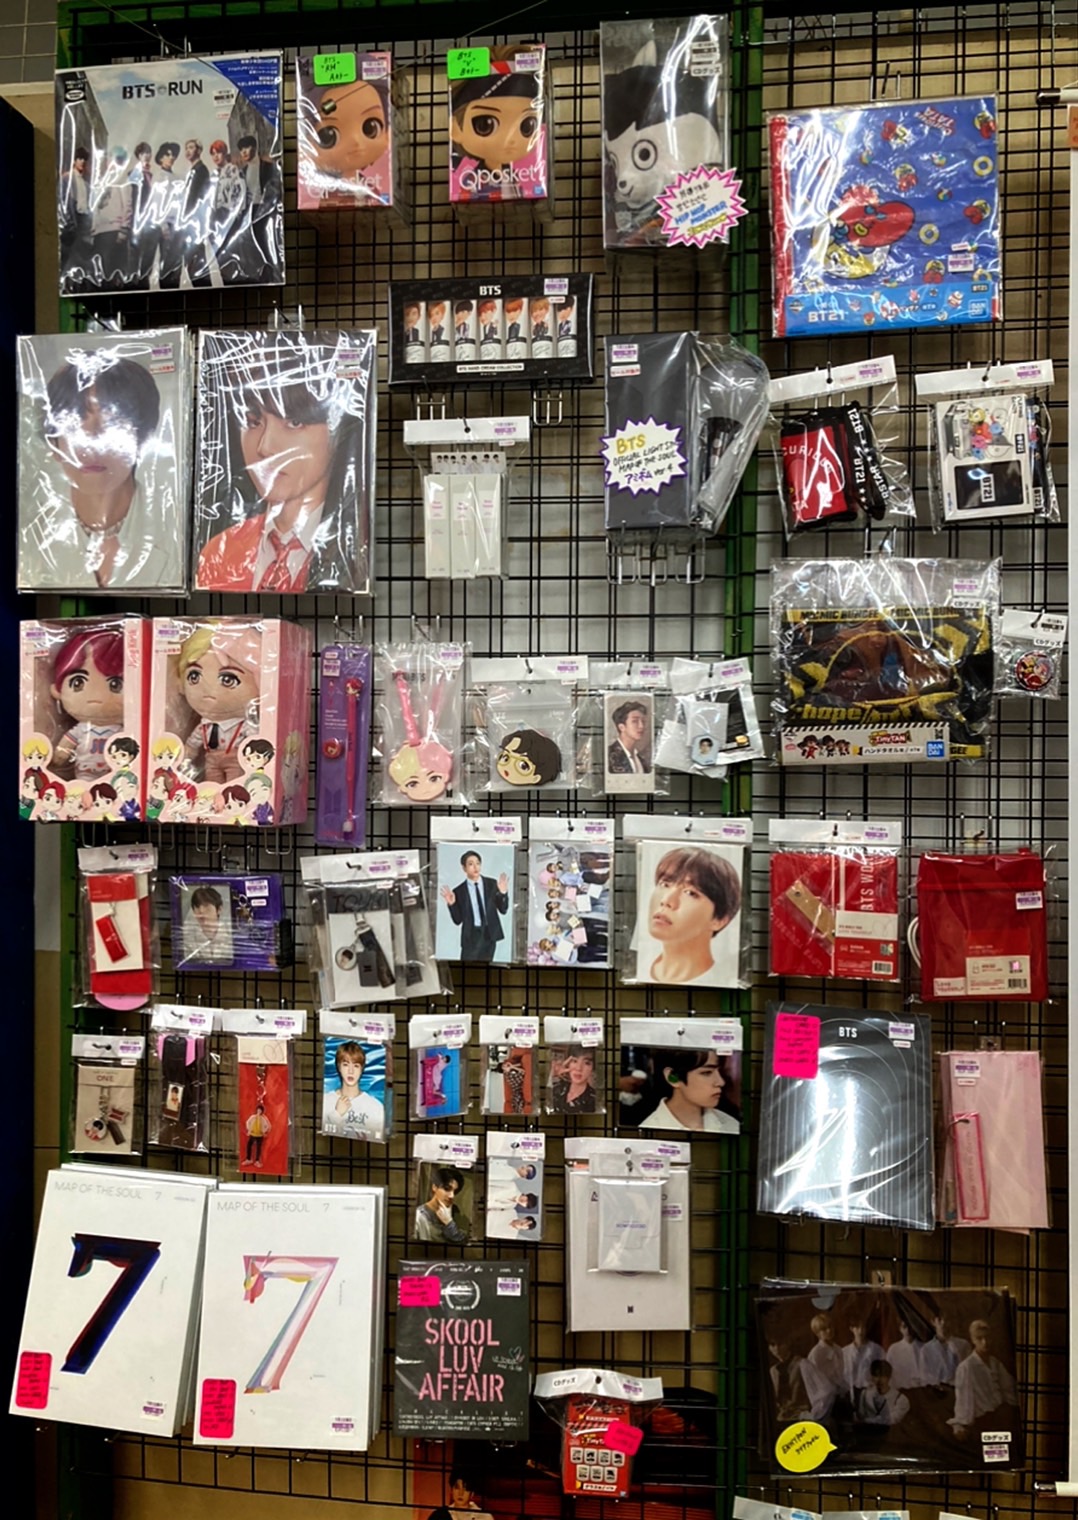 CD/DVD】11/26 BTSグッズ、【PHOTO CARD】【POST CARD】店頭に出ました！ - 万代書店 諏訪店